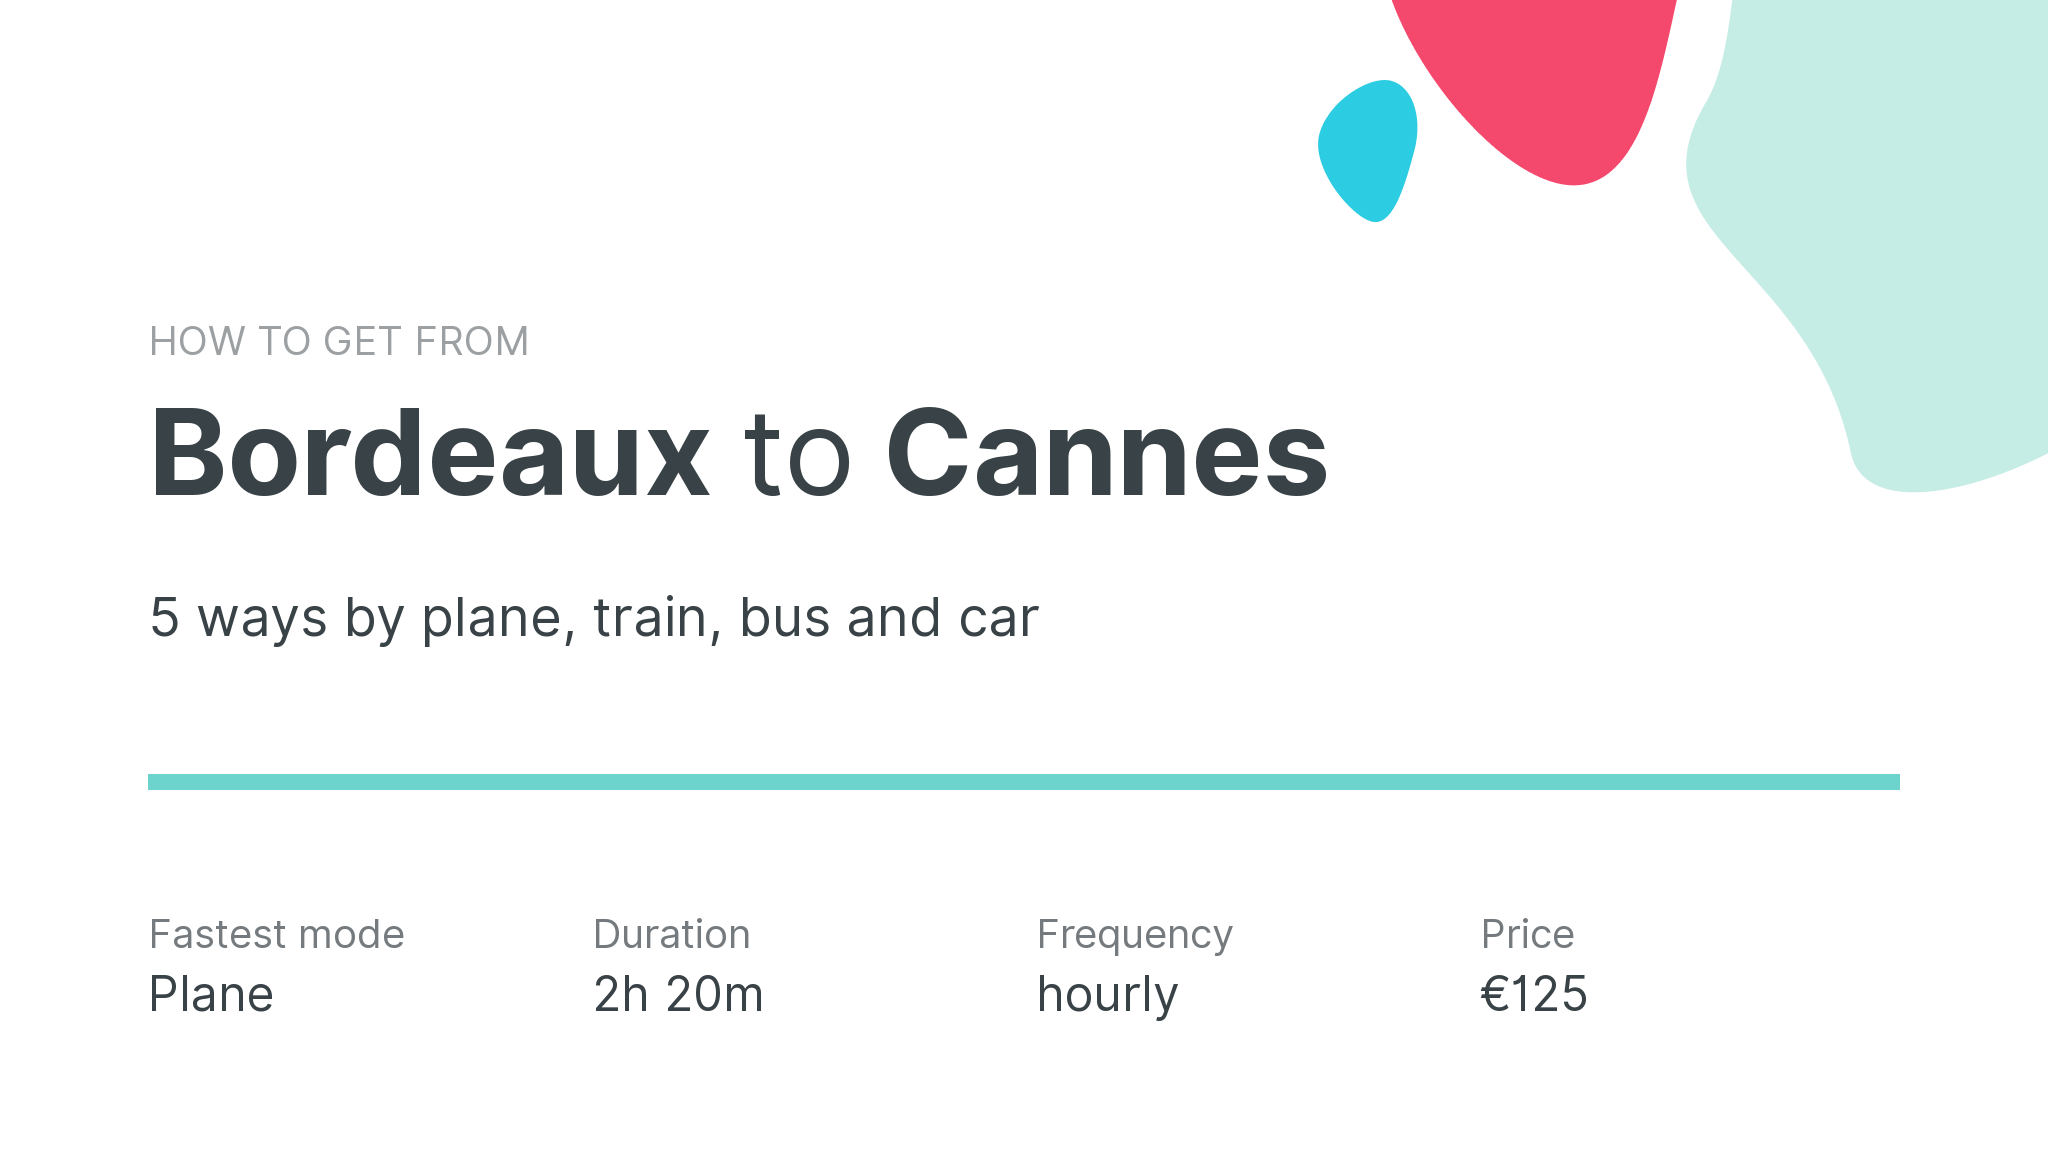 How do I get from Bordeaux to Cannes